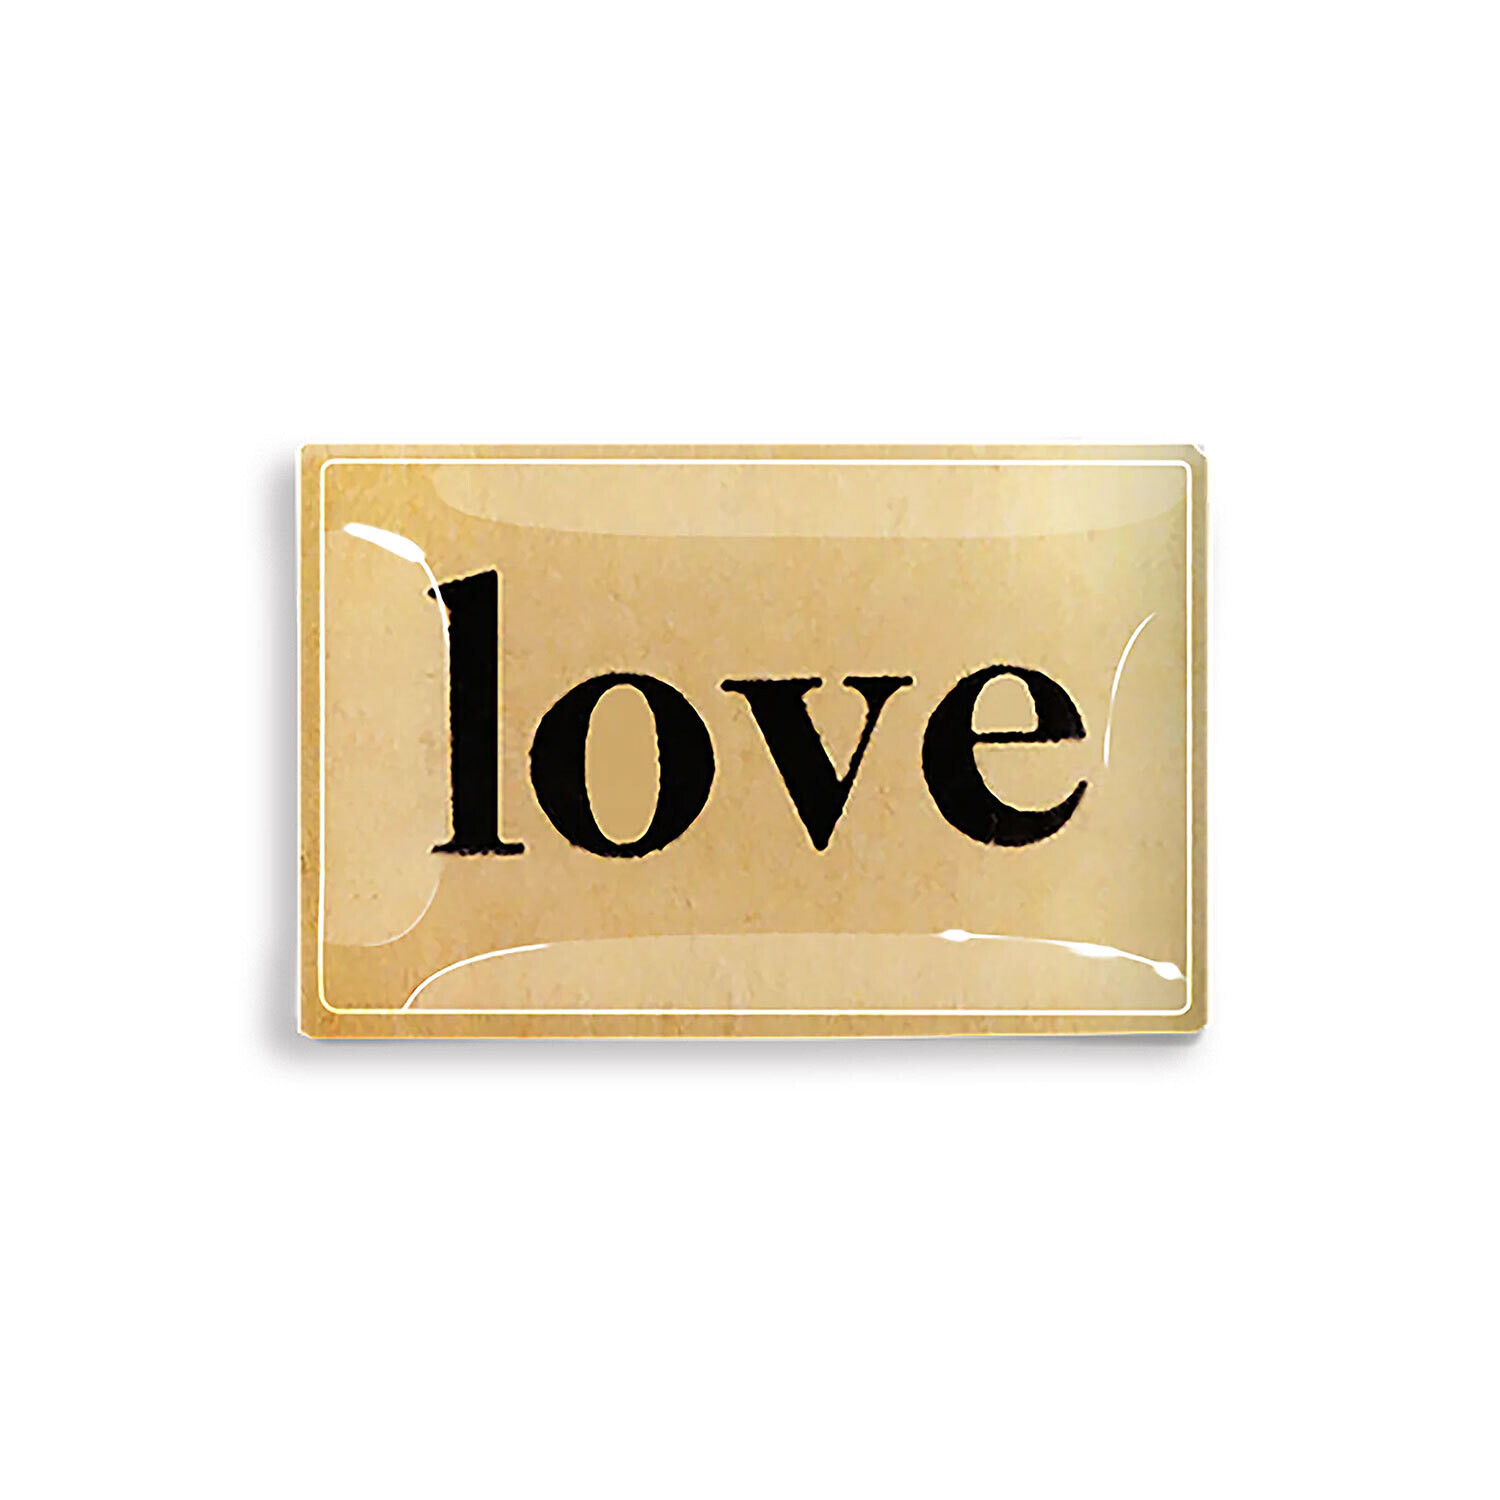 Love Small Typeface 3.5"x5.5" Decoupage Glass Tray